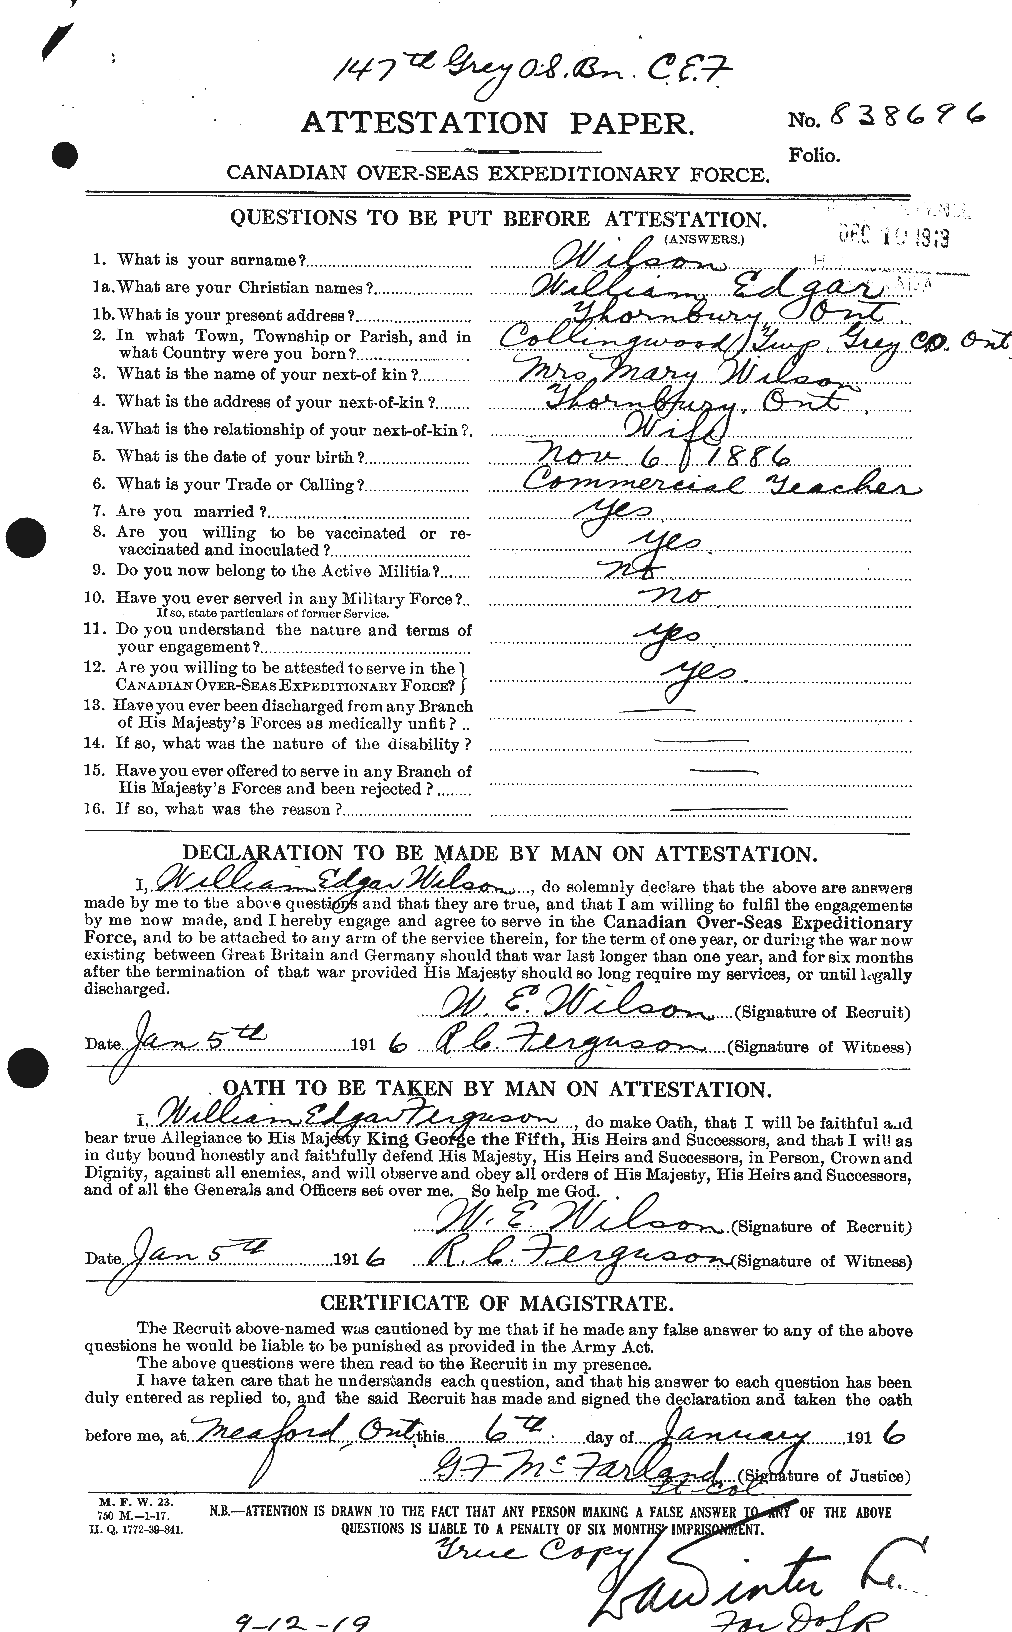 Personnel Records of the First World War - CEF 681972a